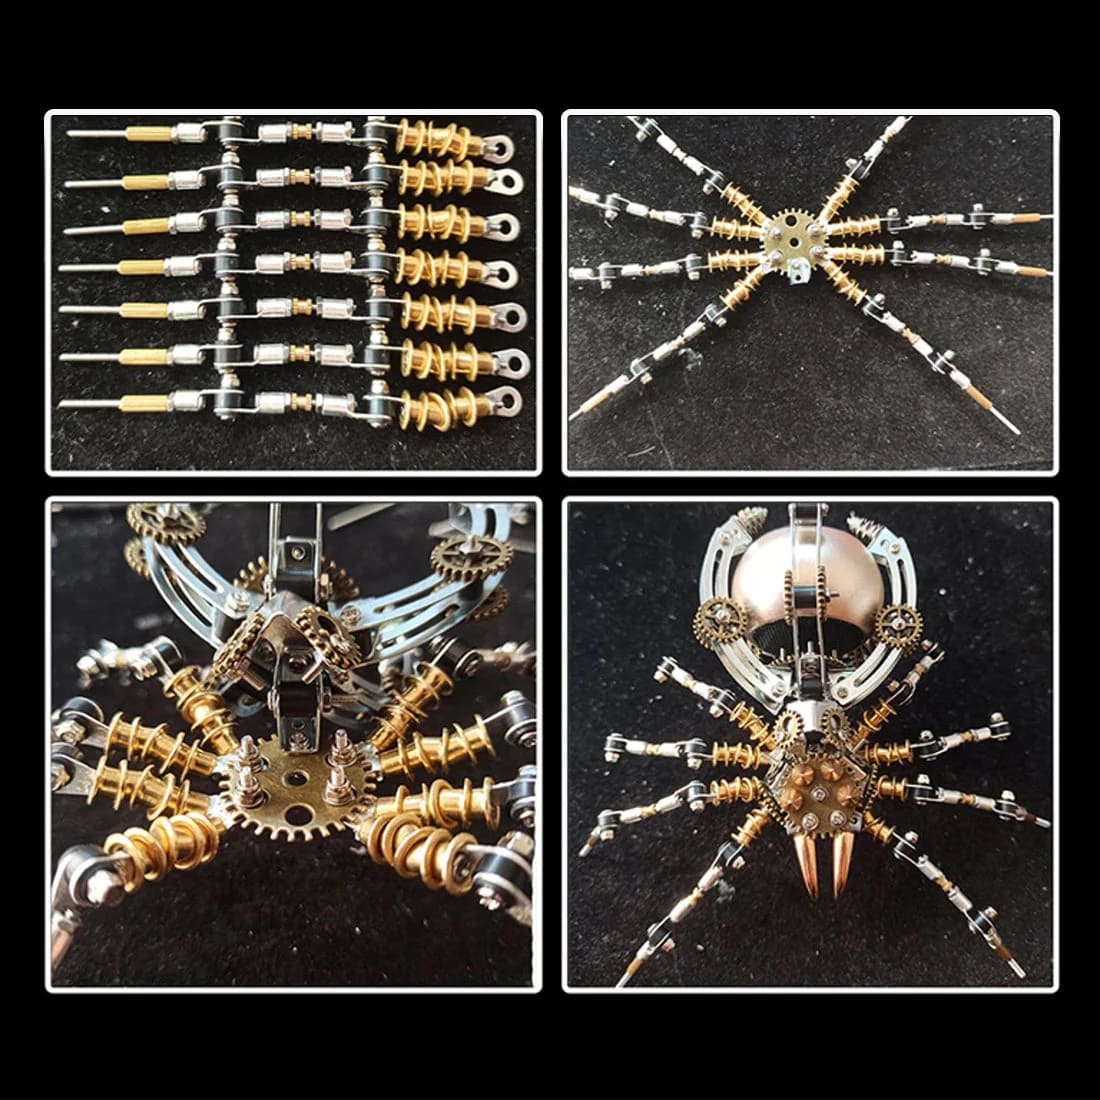 3D-Metallpuzzle Spinne